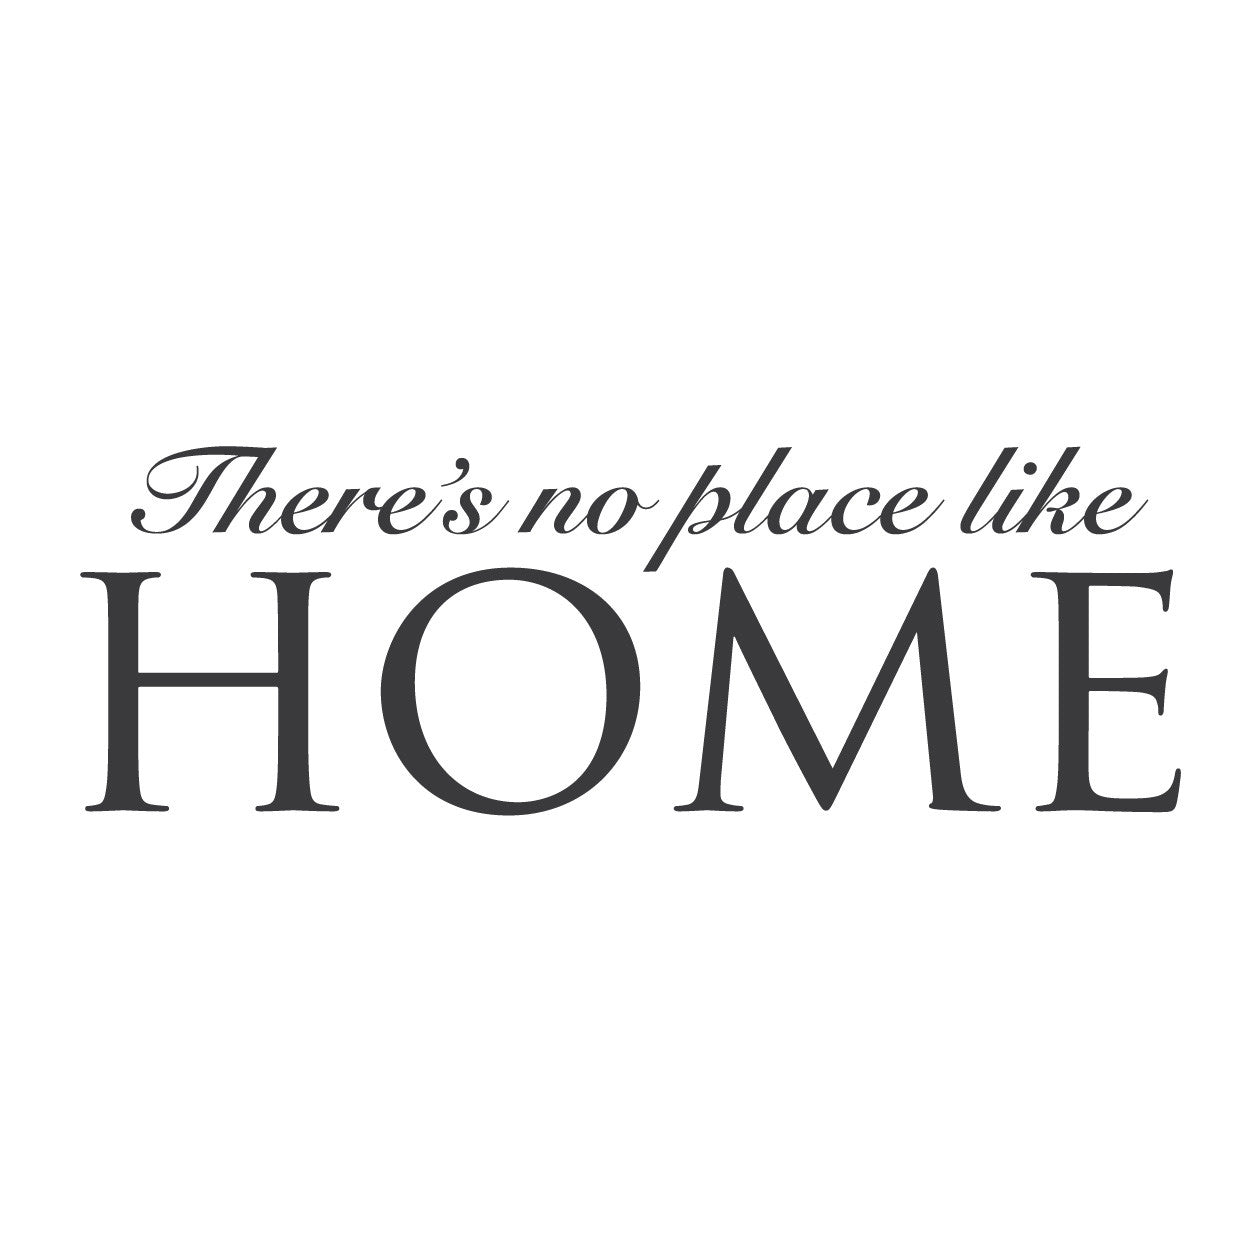 Theres No Place Like Home Homelooker